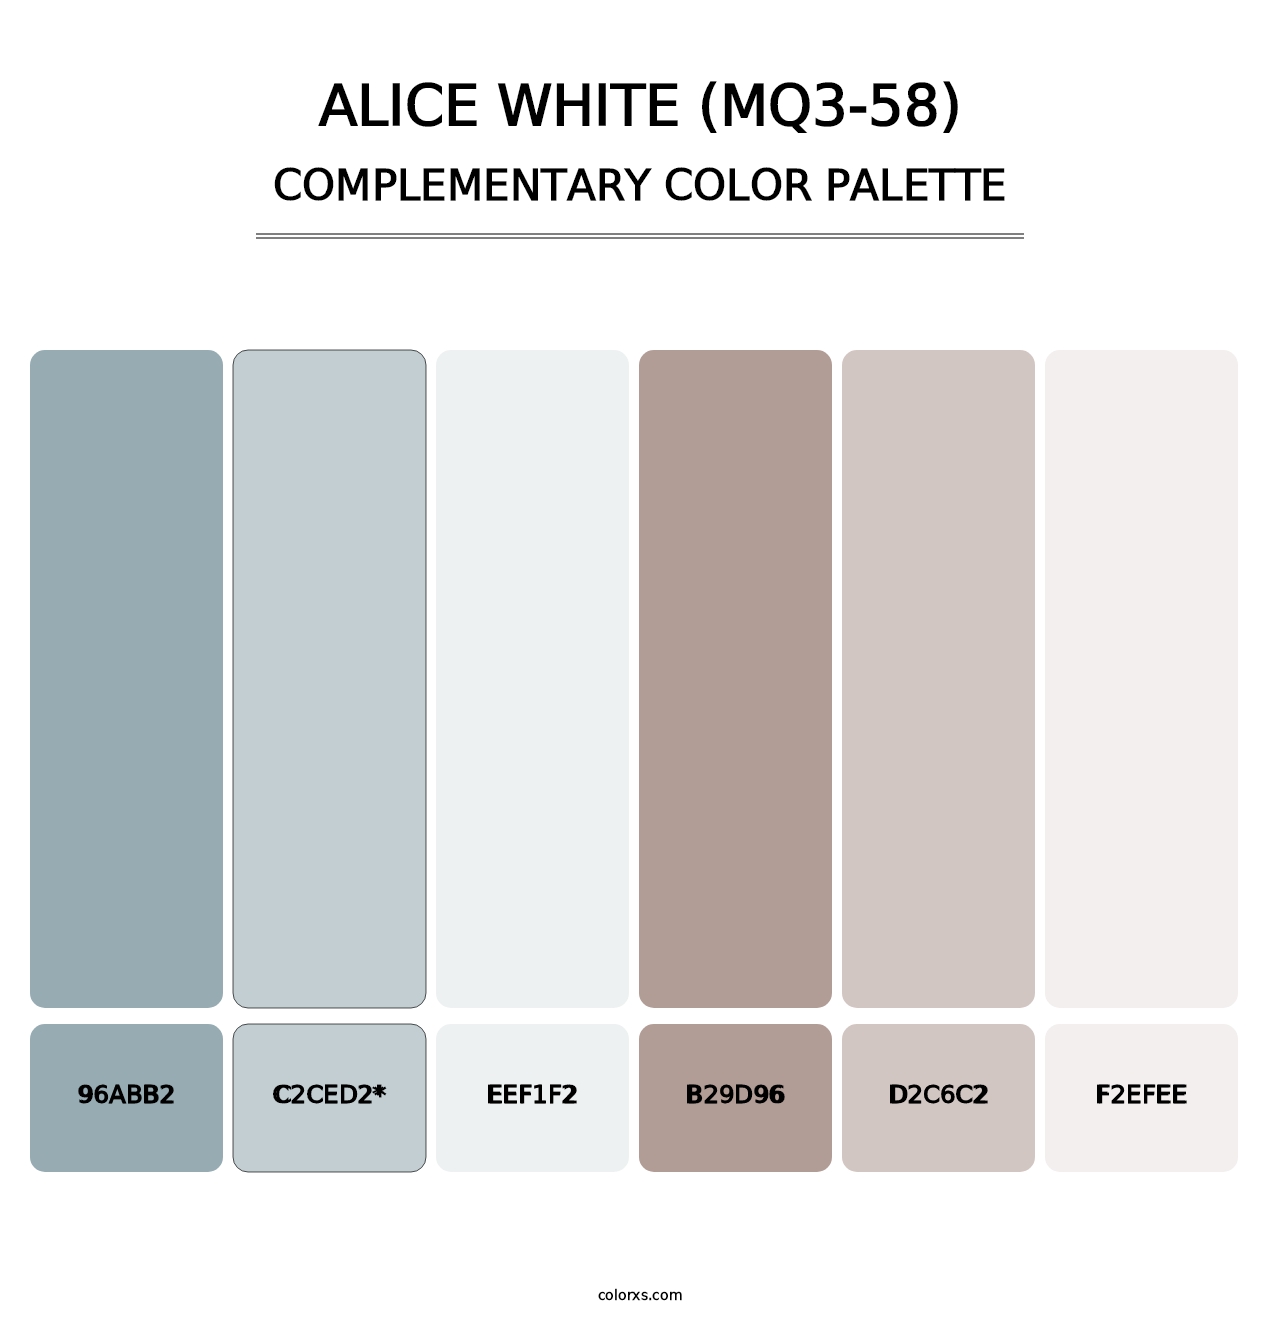 Alice White (MQ3-58) - Complementary Color Palette